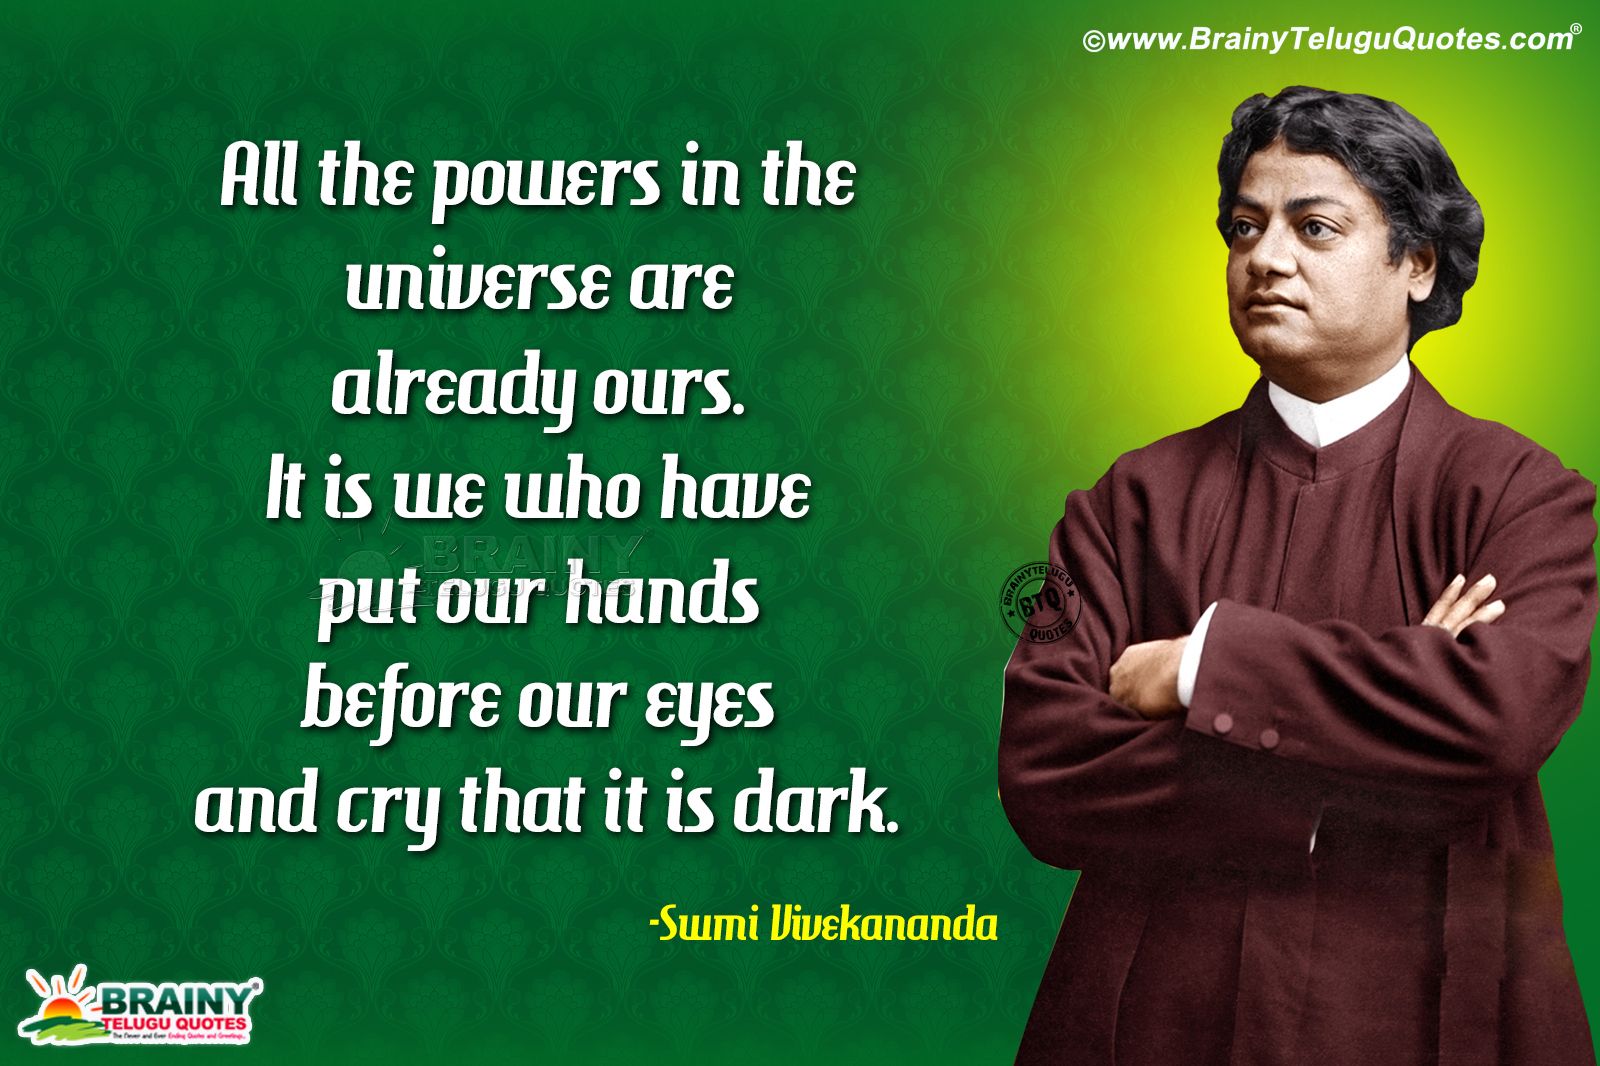 Swami Vivekanand quote wallpaper APK for Android Download